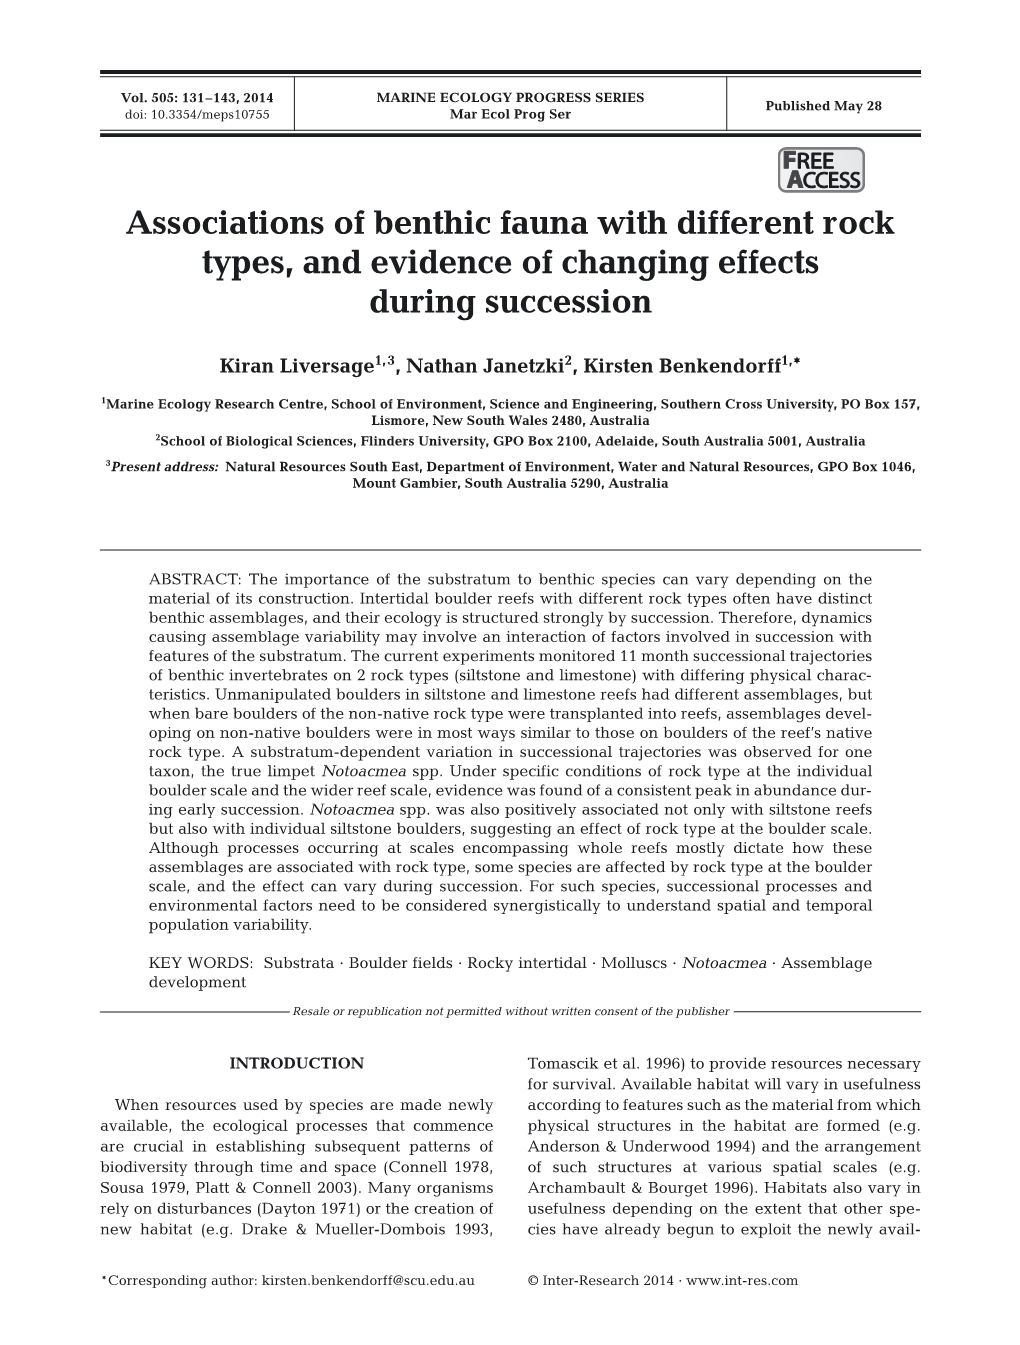 Associations of Benthic Fauna with Different Rock Types, and Evidence of Changing Effects During Succession